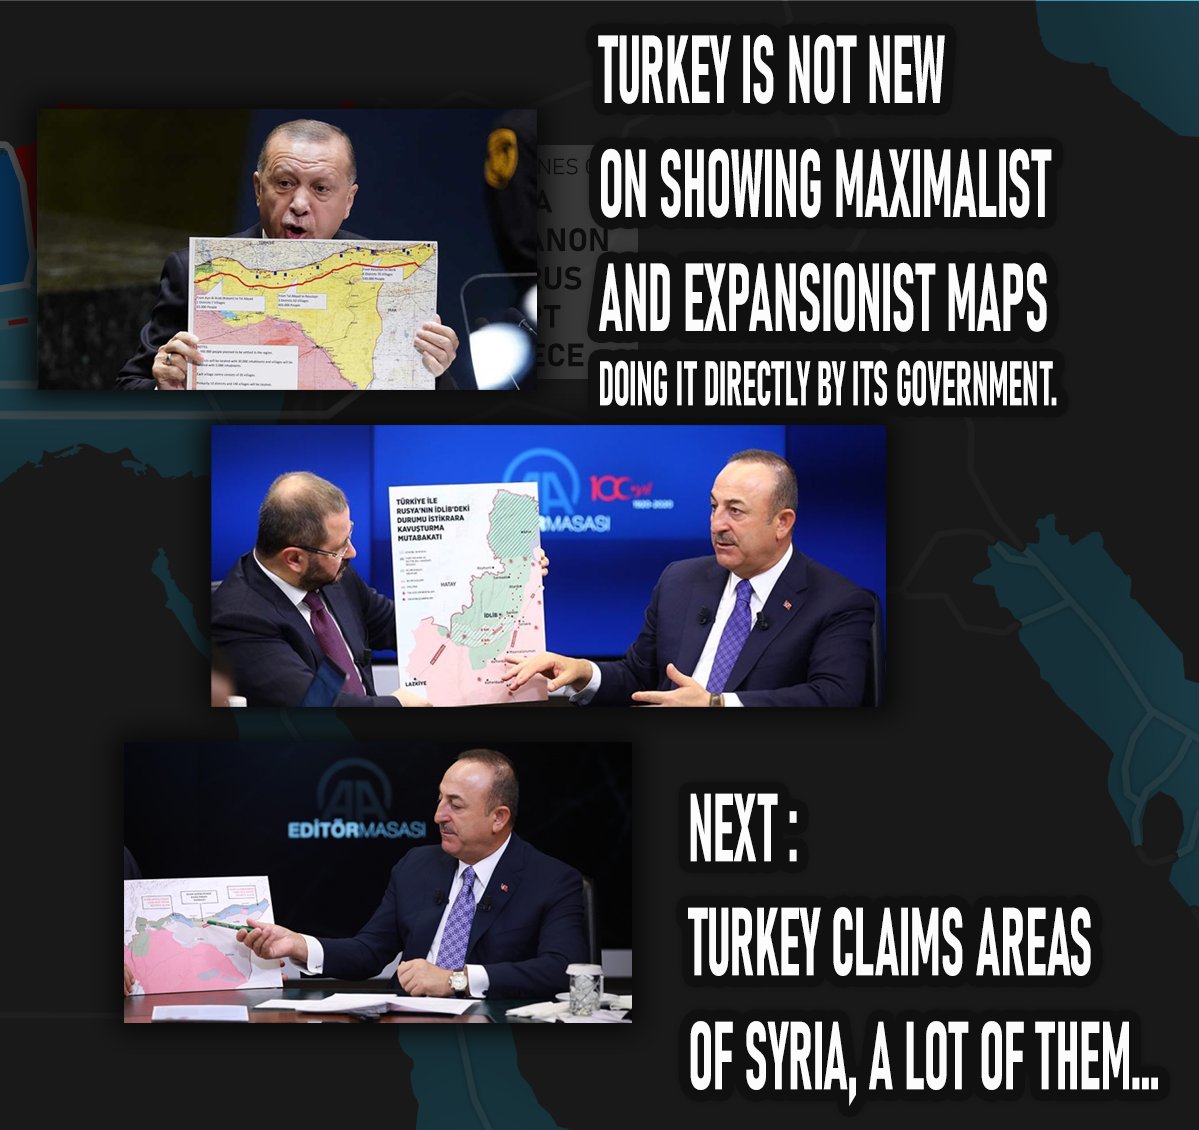 Turkey is not new on showing maximalistic maps with illegal claims.Turkey funds terrorism in Syria and claims Syrian lands, a lot of them, among other lands from different countries.See image—Turkish President claims North Syria while Turkish FM claims Idlib and North Syria.